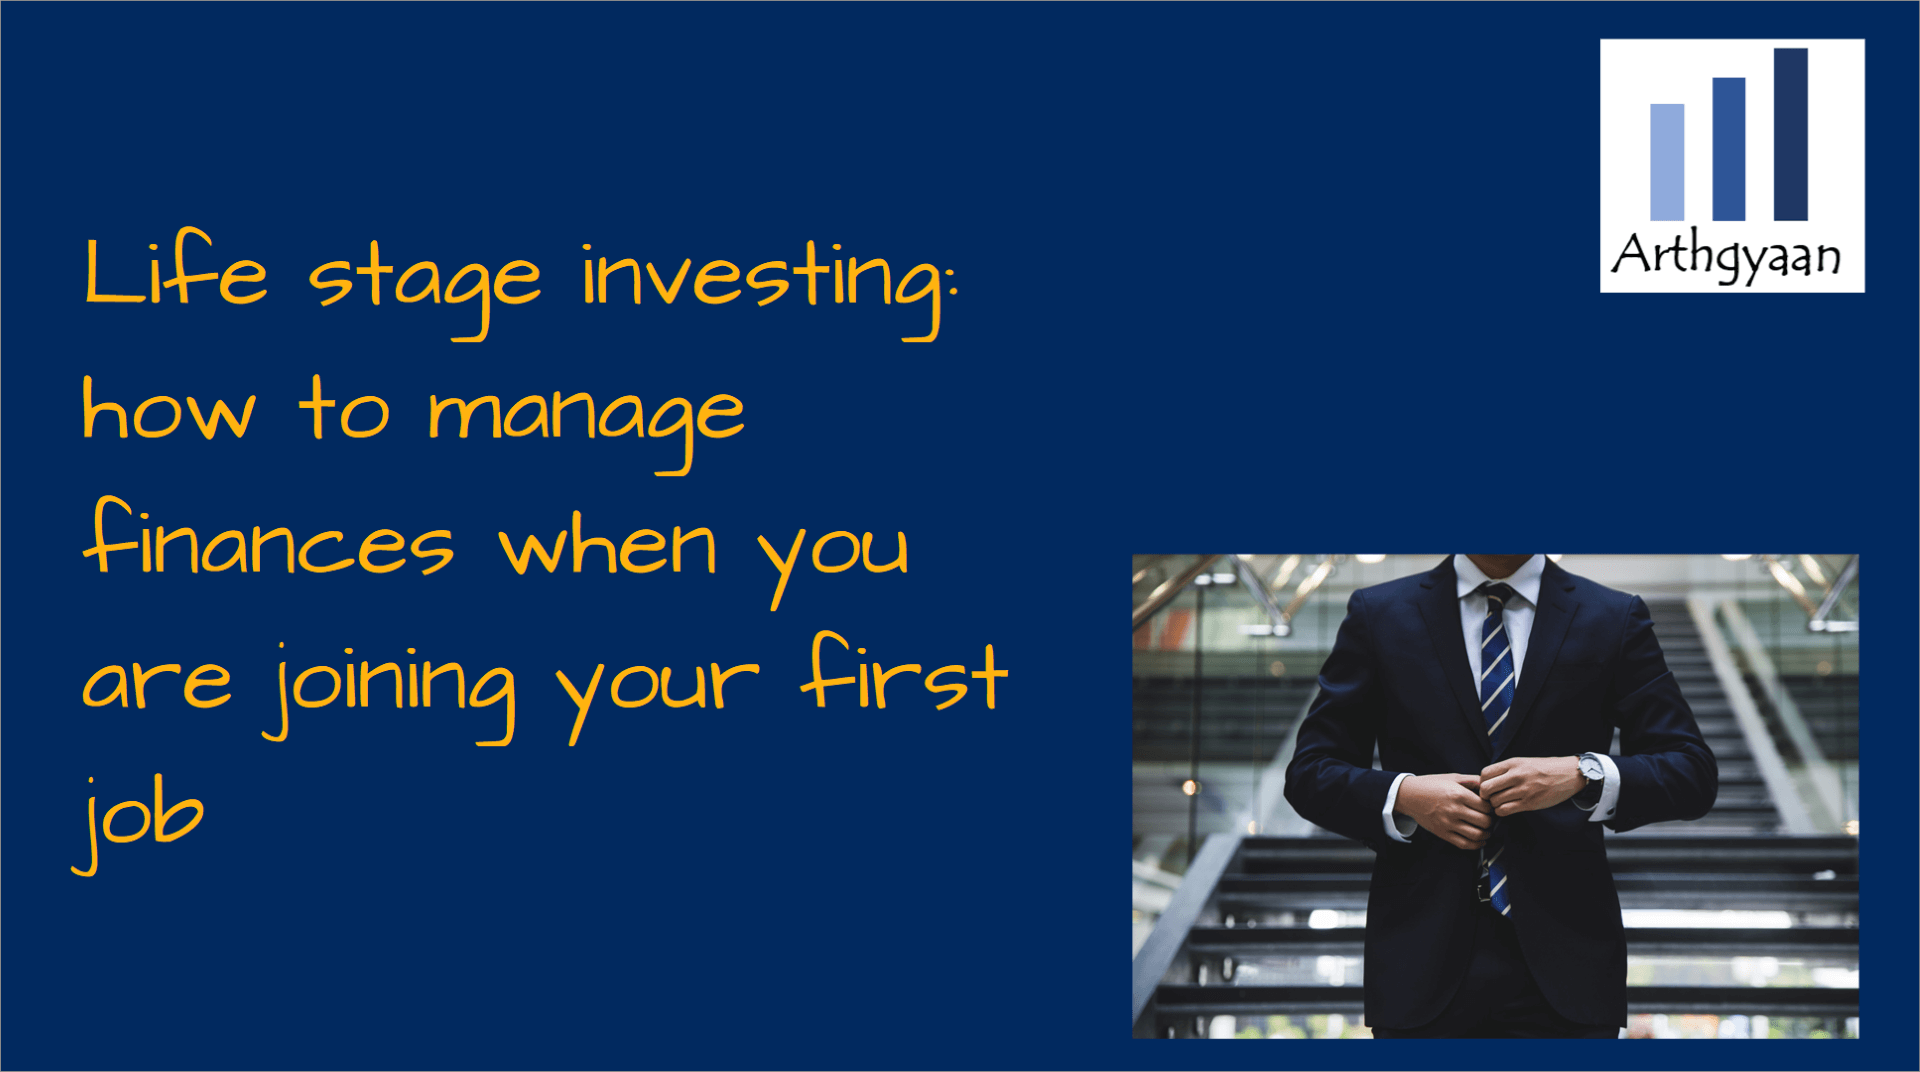 Life stage investing: how to manage finances when you are joining your first job